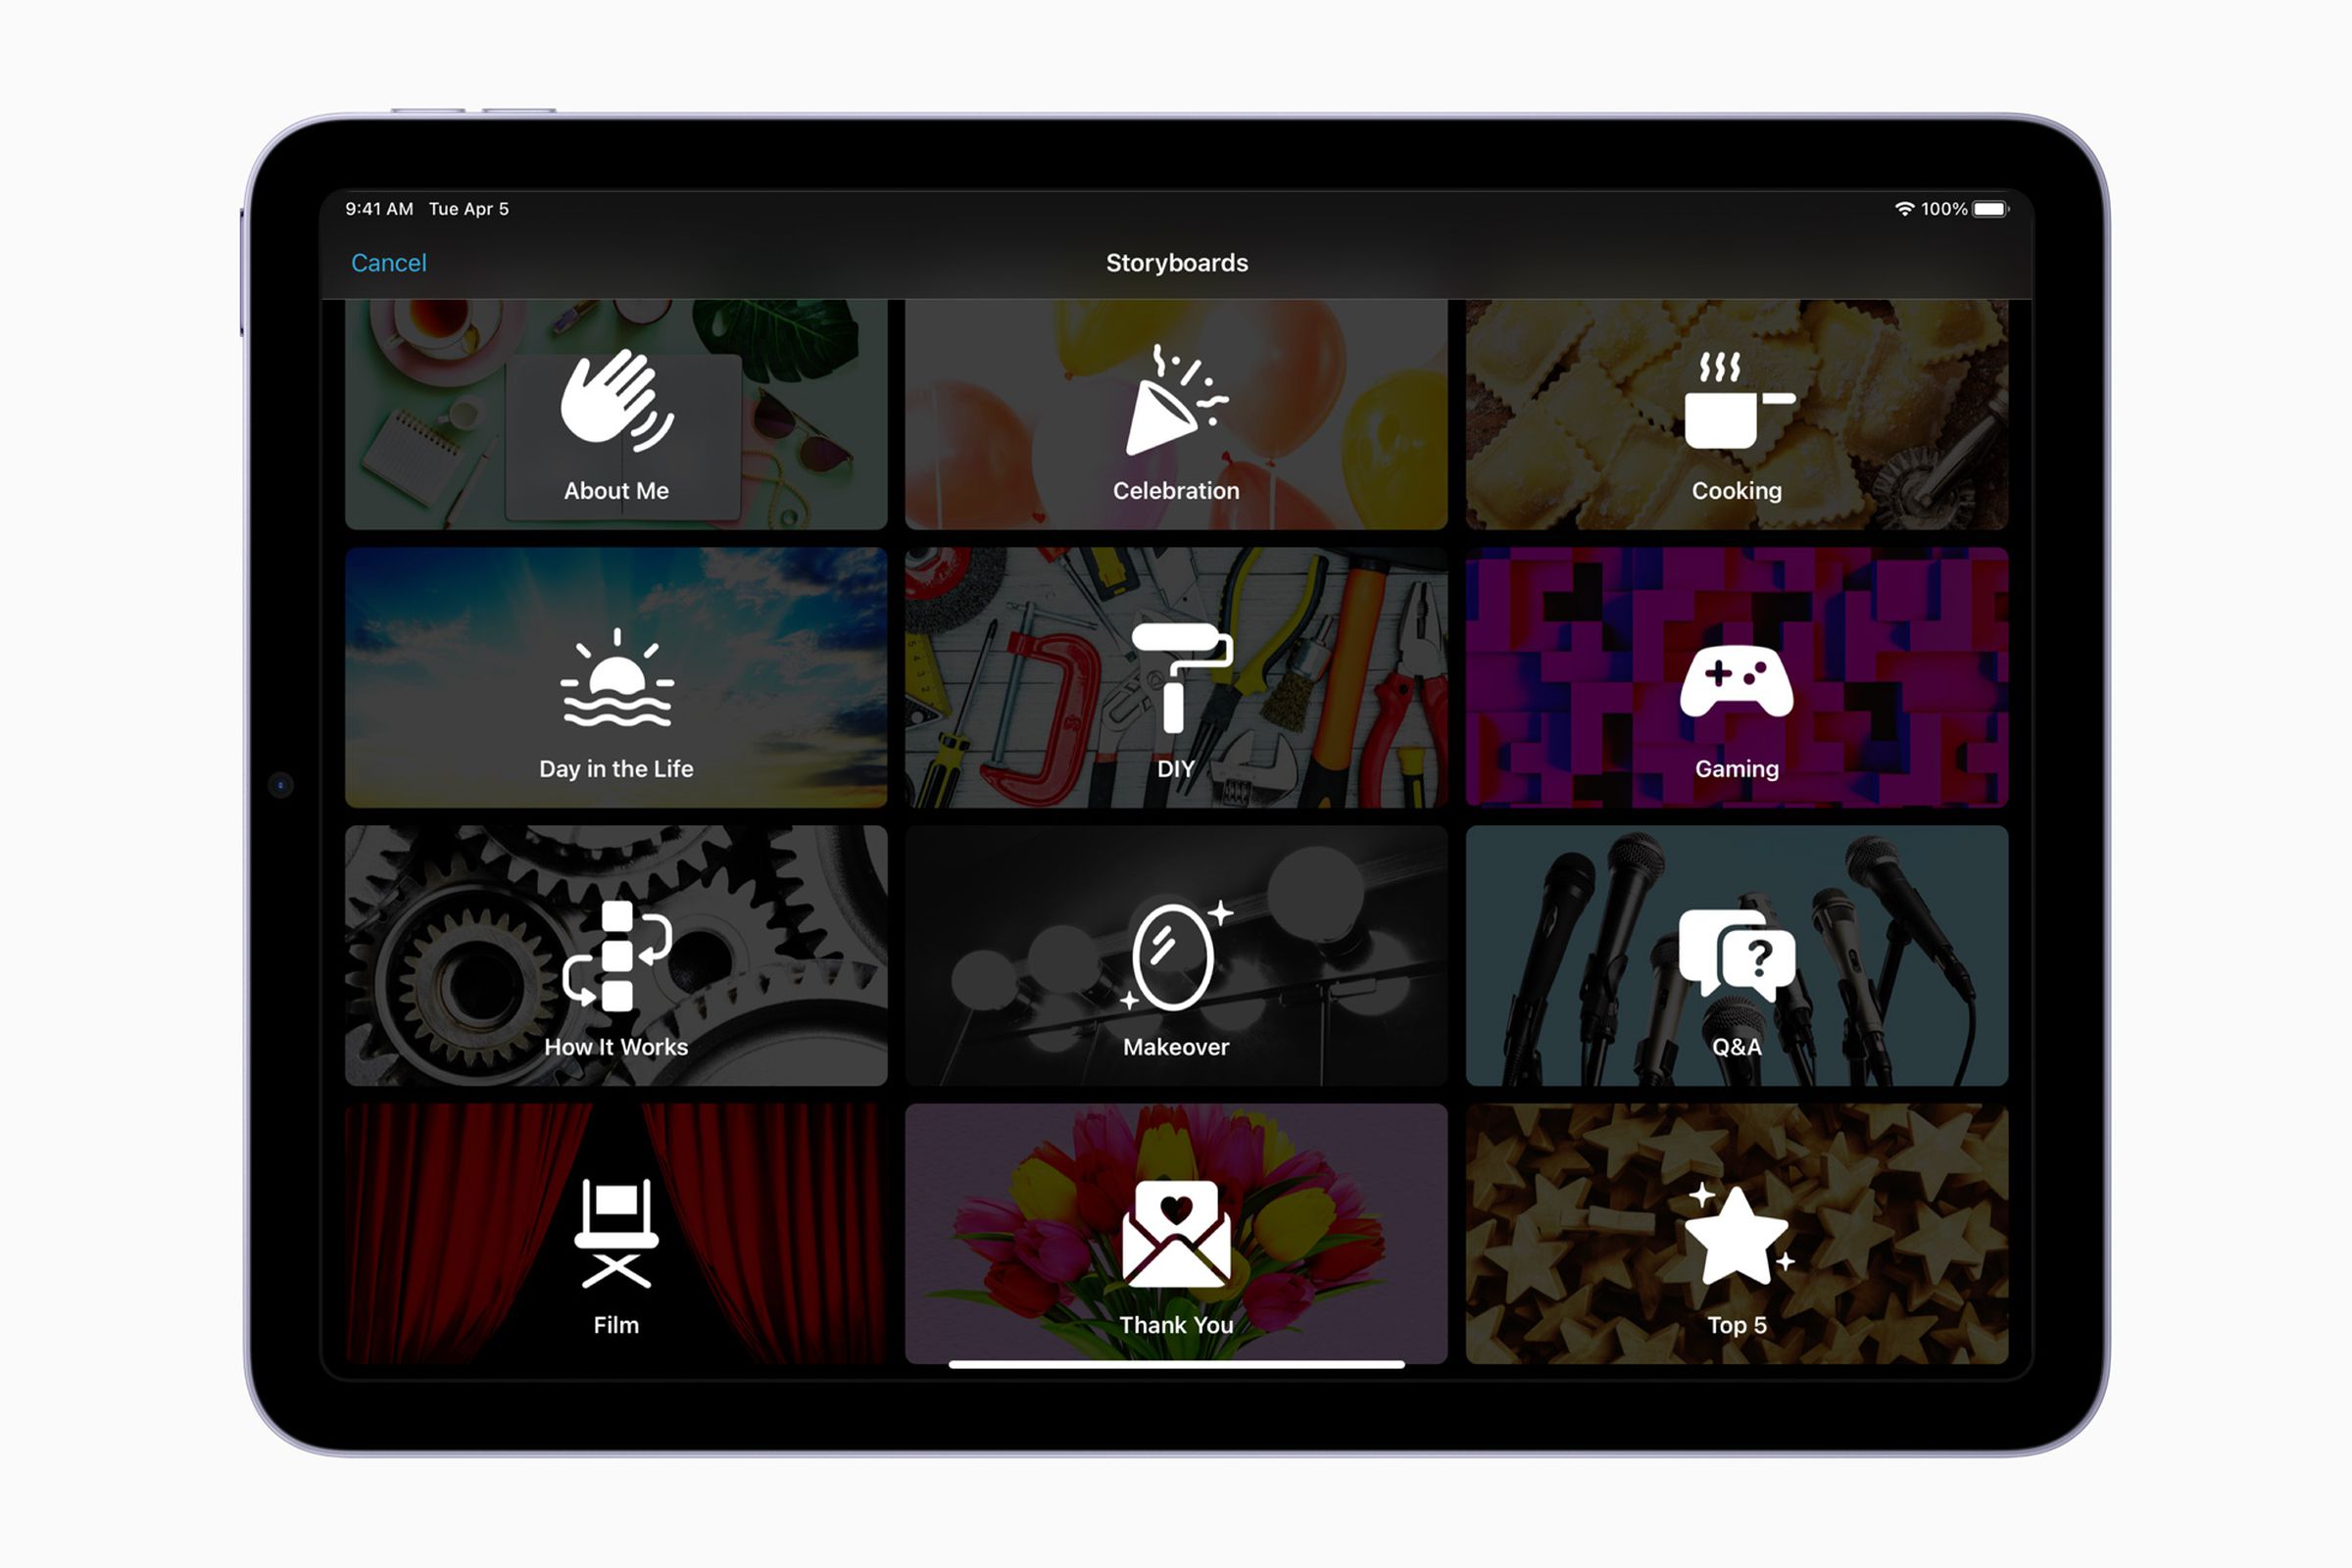 iMovie 3.0 is available now for iPhone and iPad.